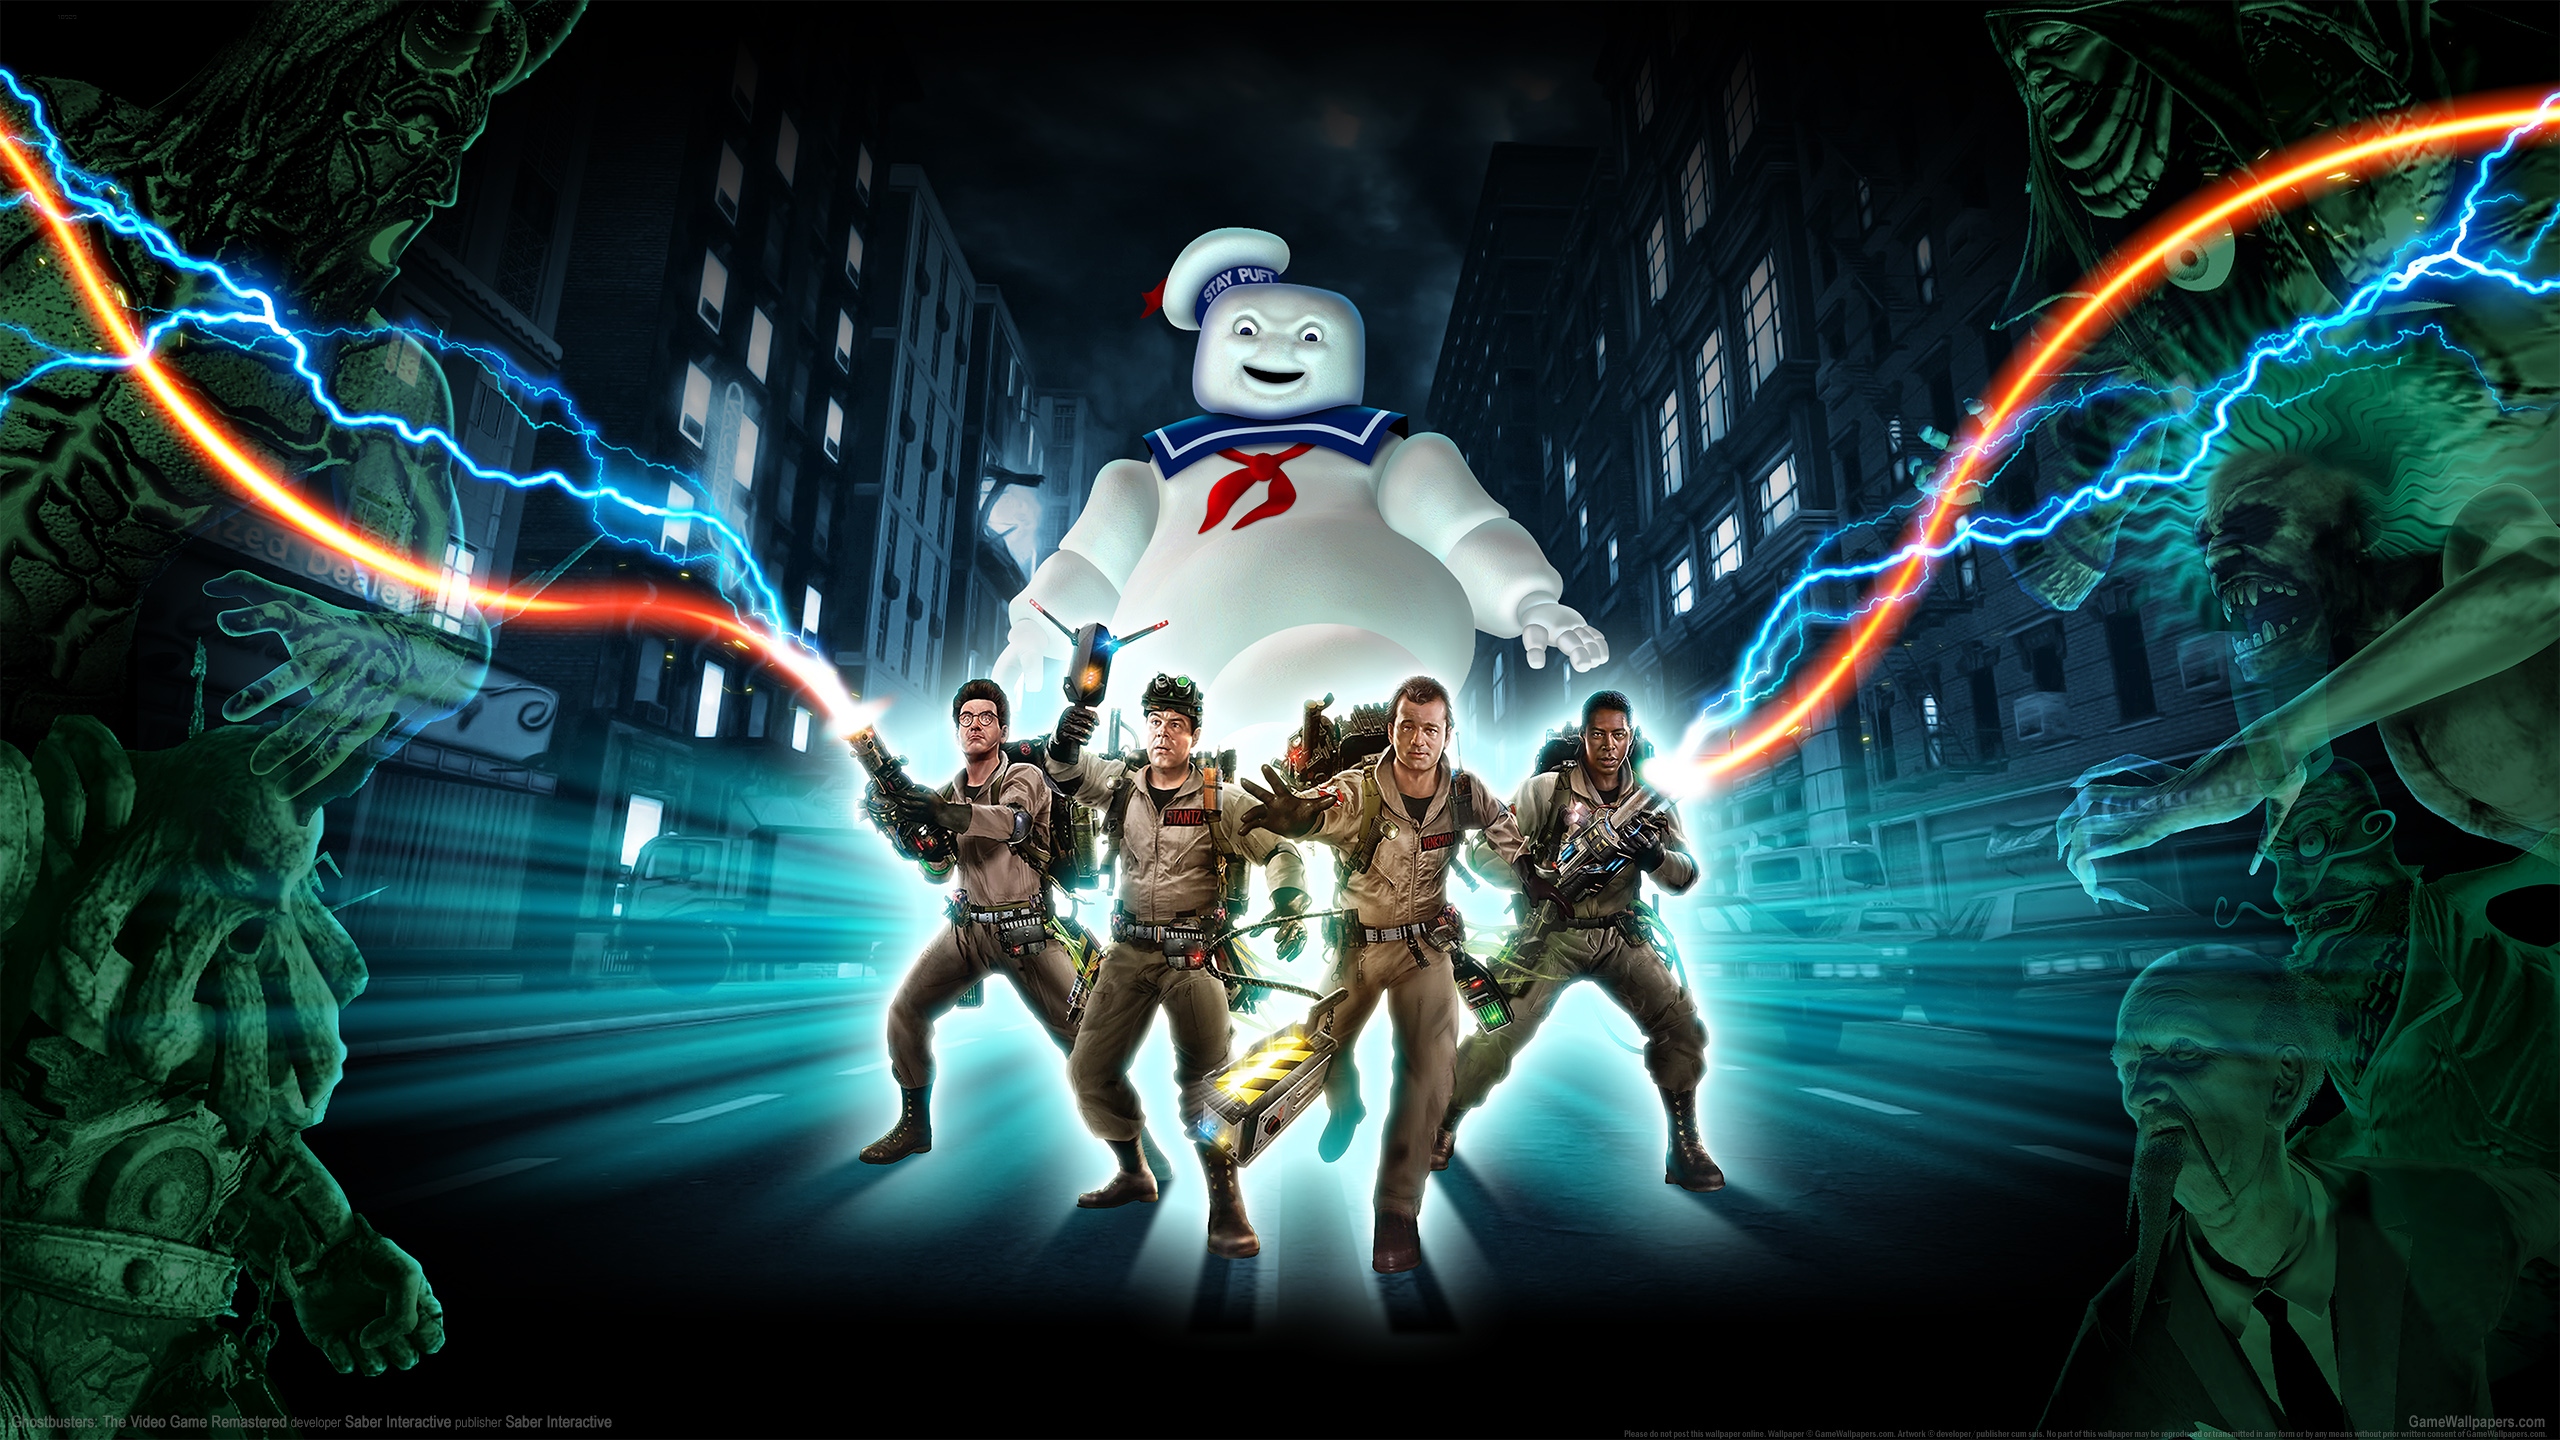 Ghostbusters: The Video Game Remastered 2560x1440 wallpaper or background 01